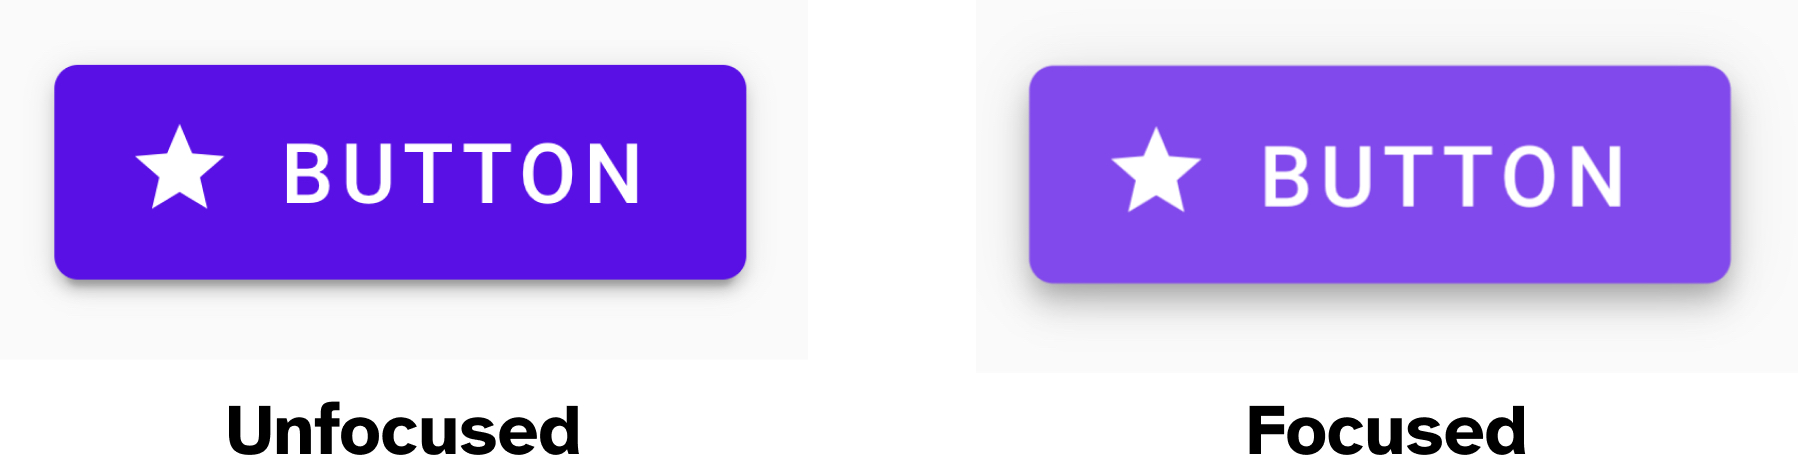 A button from Material Design's component library in its default unfocused state on the left, and its focused state on the right. When unfocused, the button has a navy blue background color. In its focused state, the background color becomes purple.